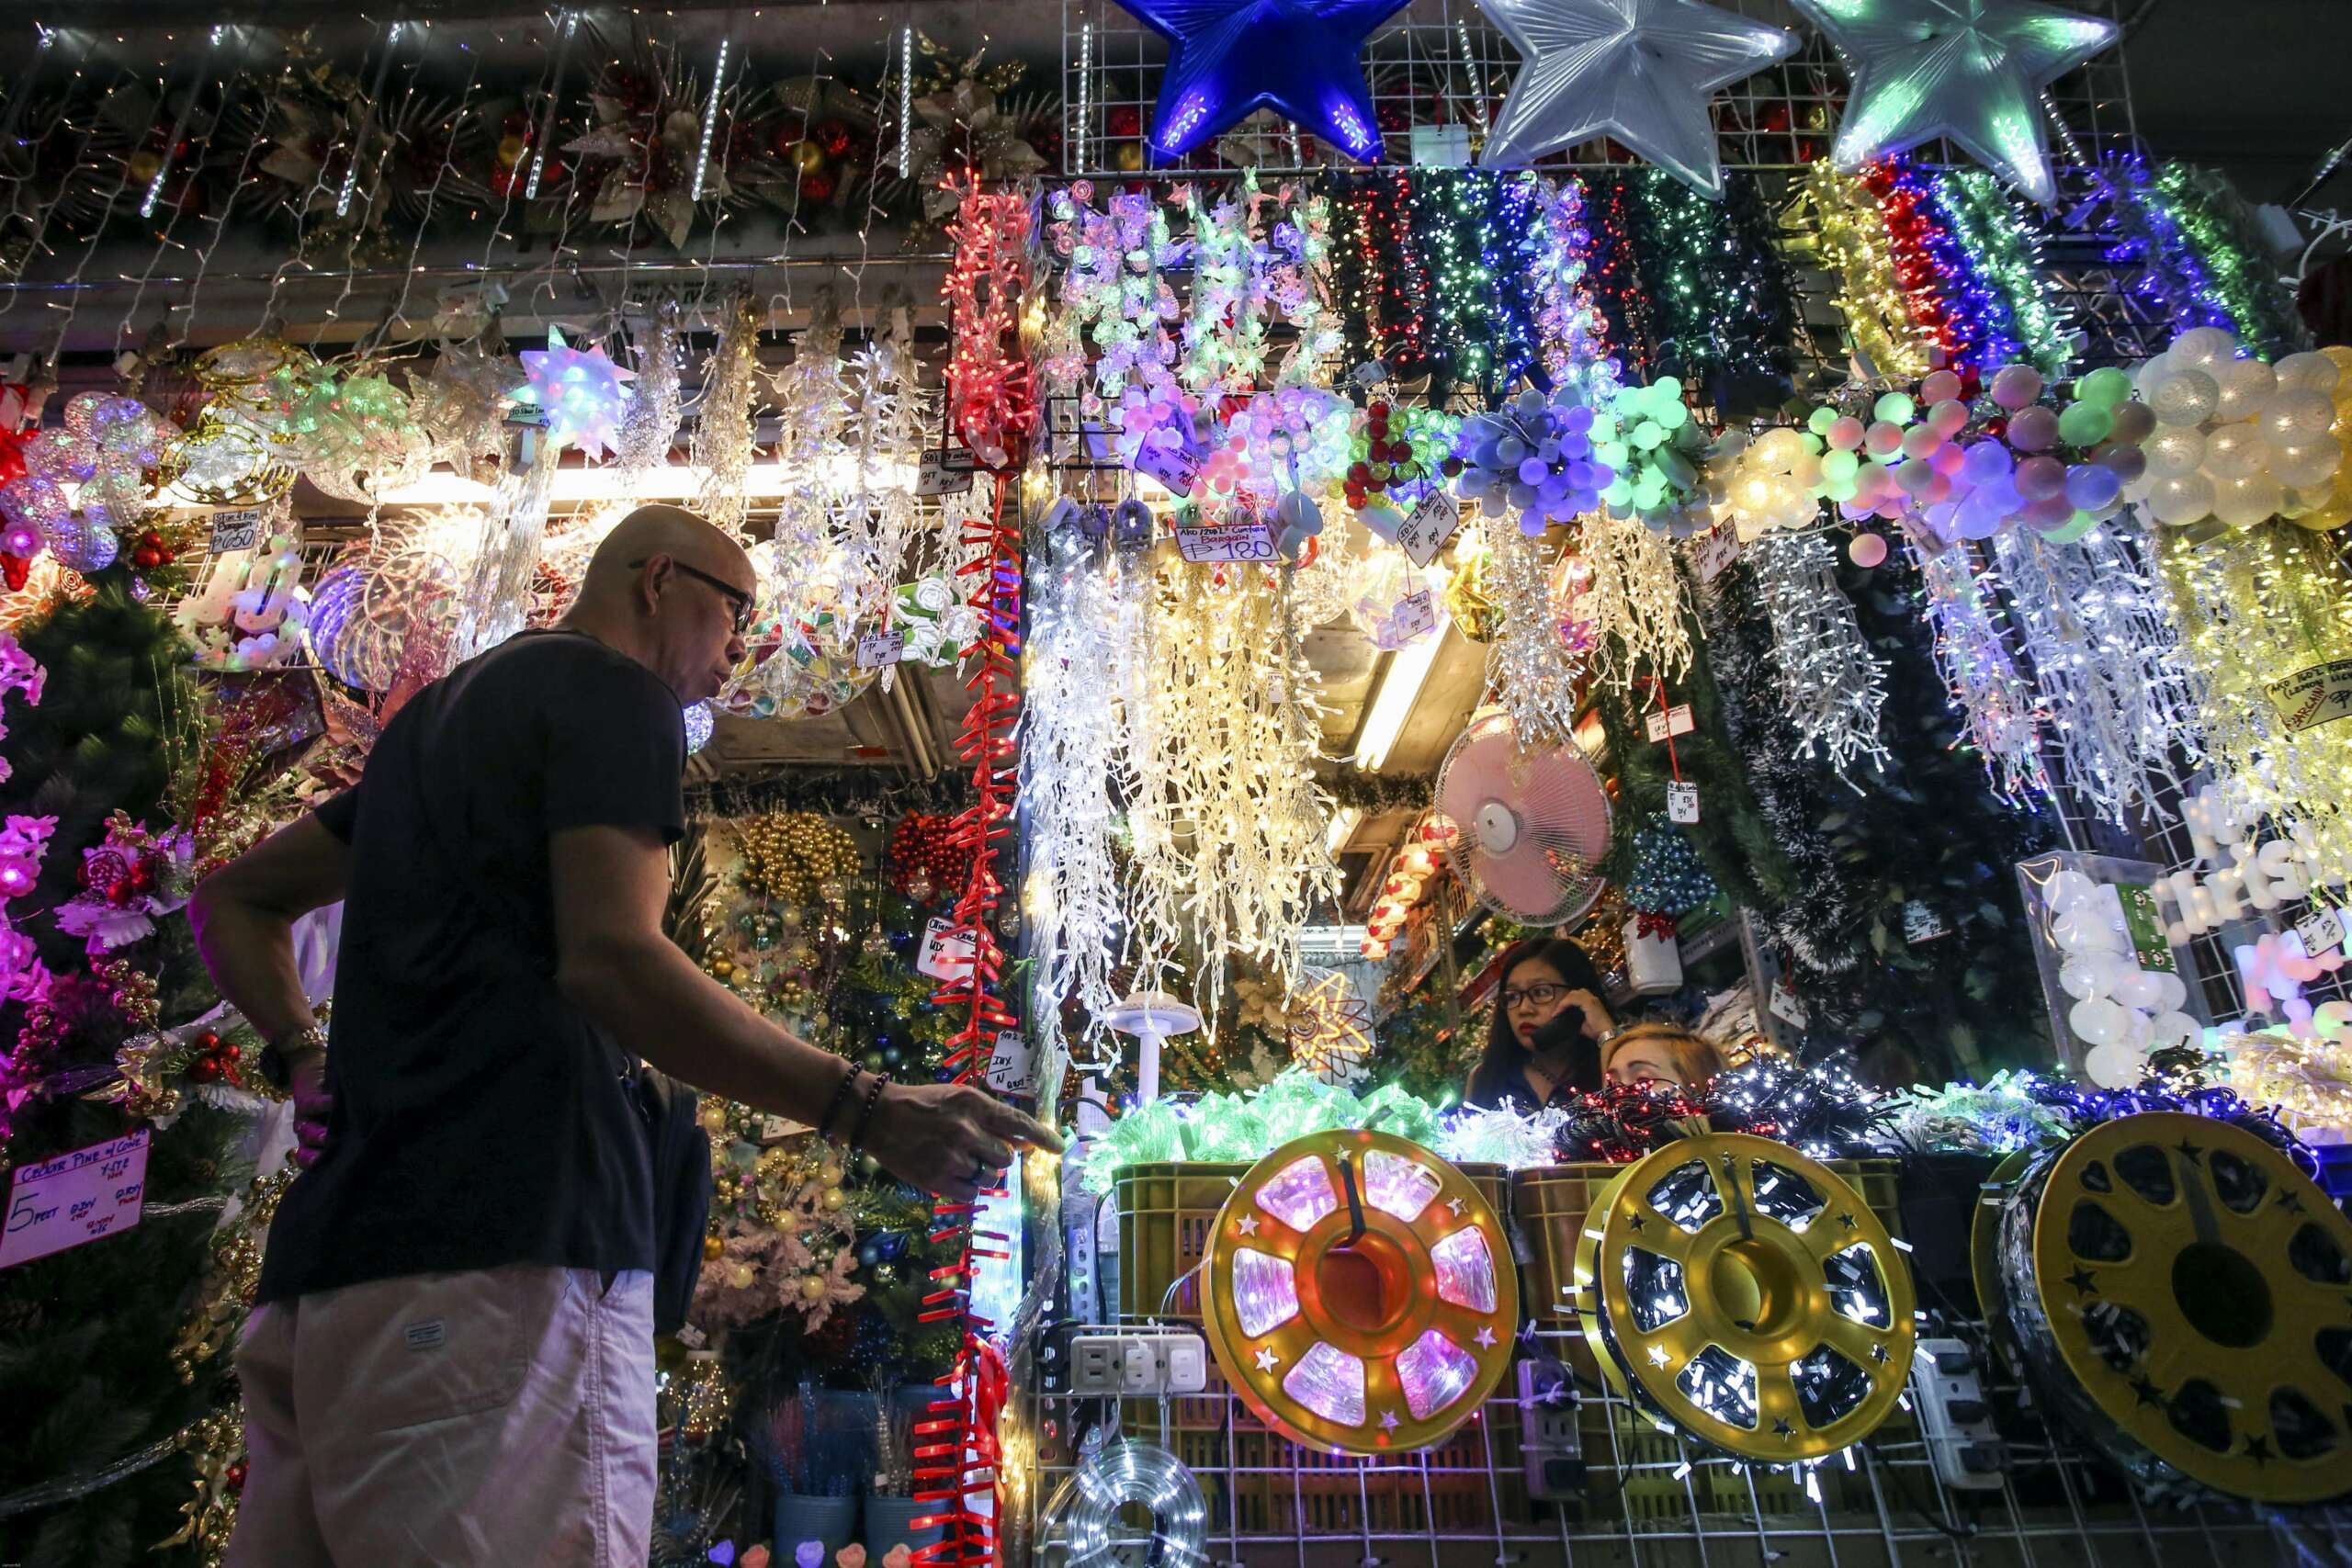 Advocacy groups warn vs toxic holiday lights | Inquirer News